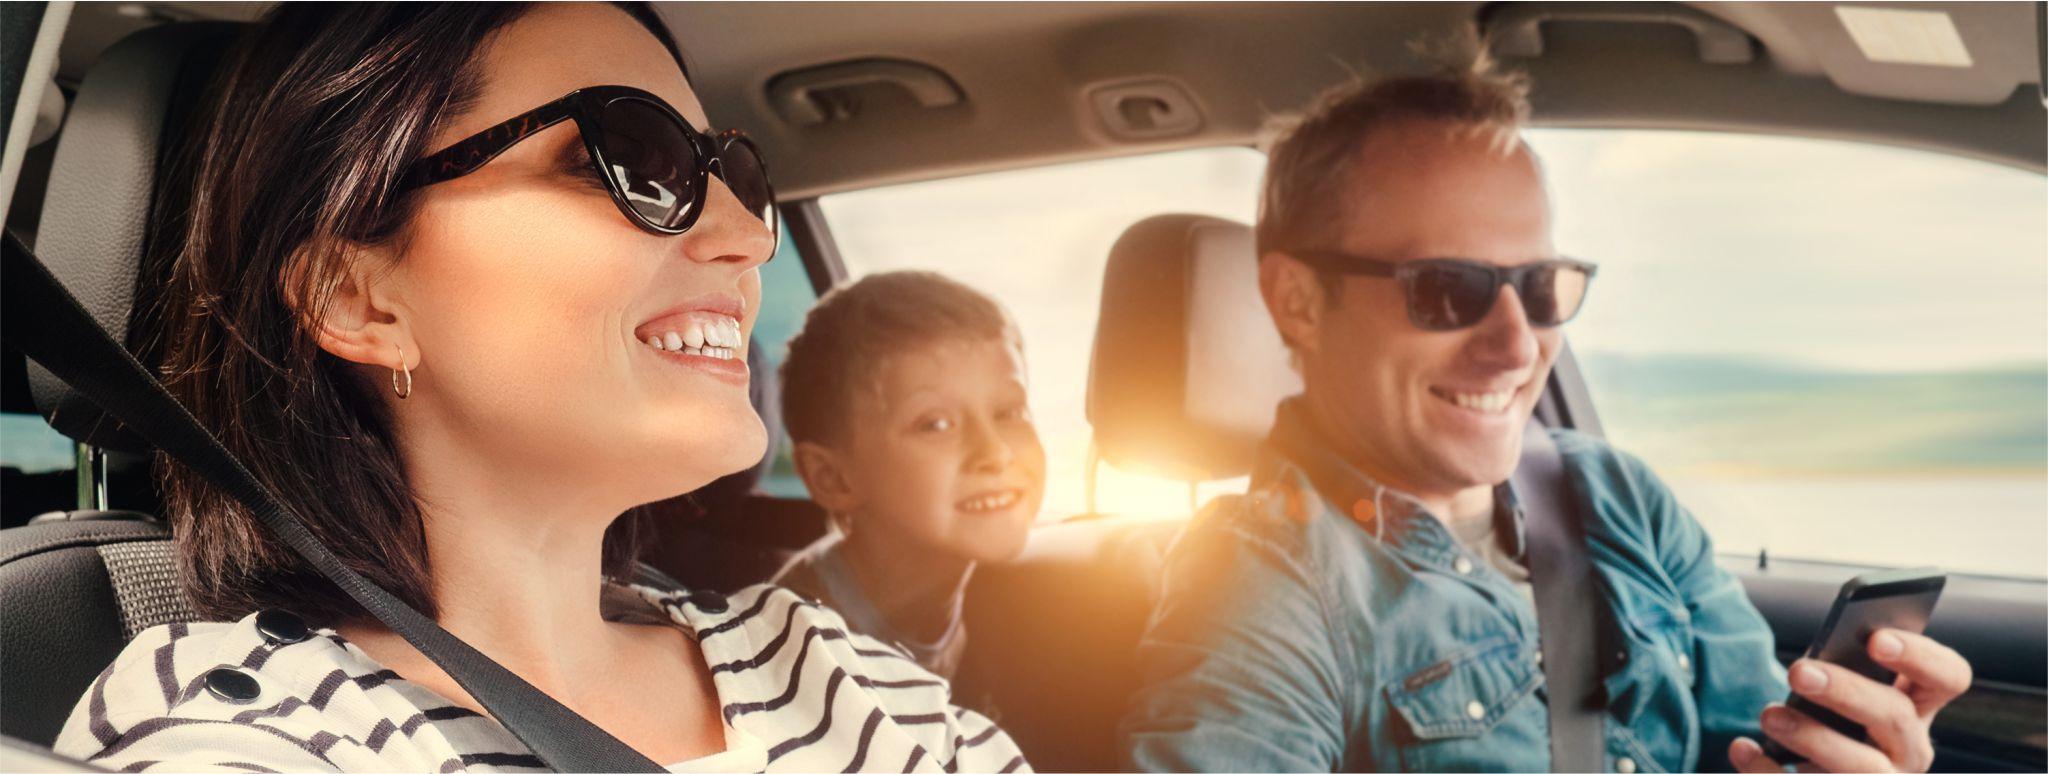 A family driving in a car wearing sunglasses smiling